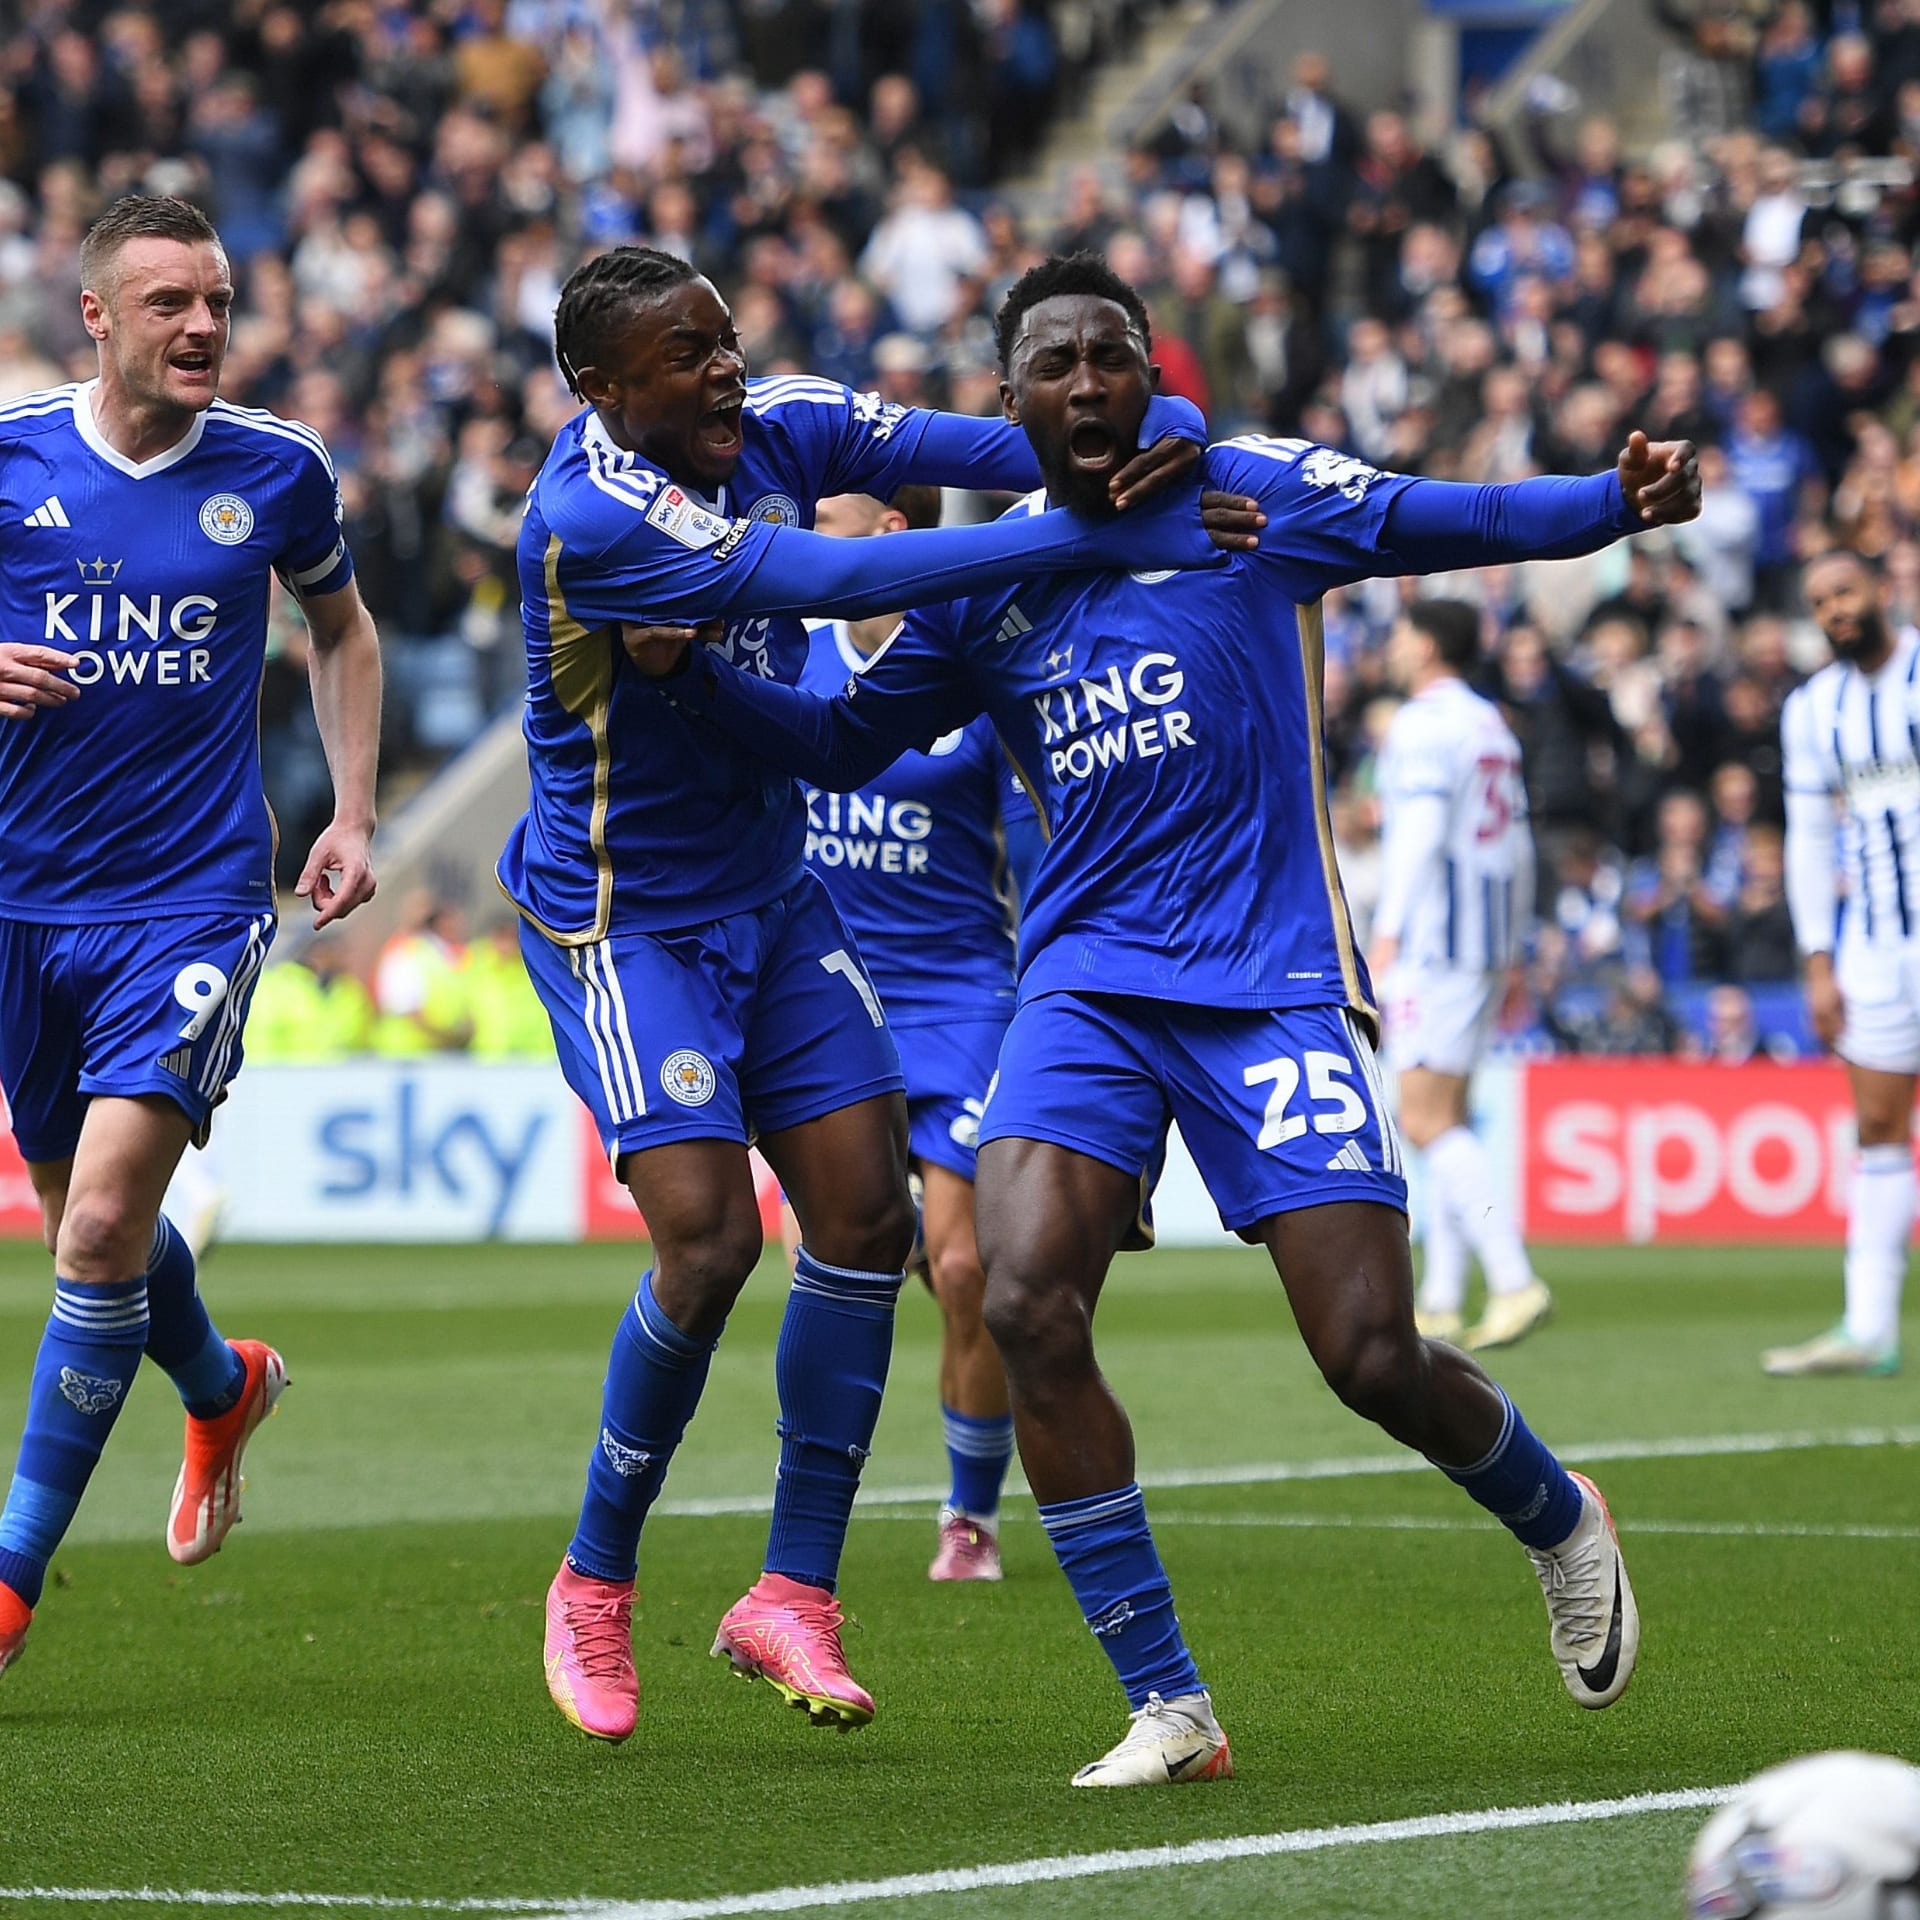 Championship: Ndidi steals in as Leicester edge West Brom to reclaim top spot